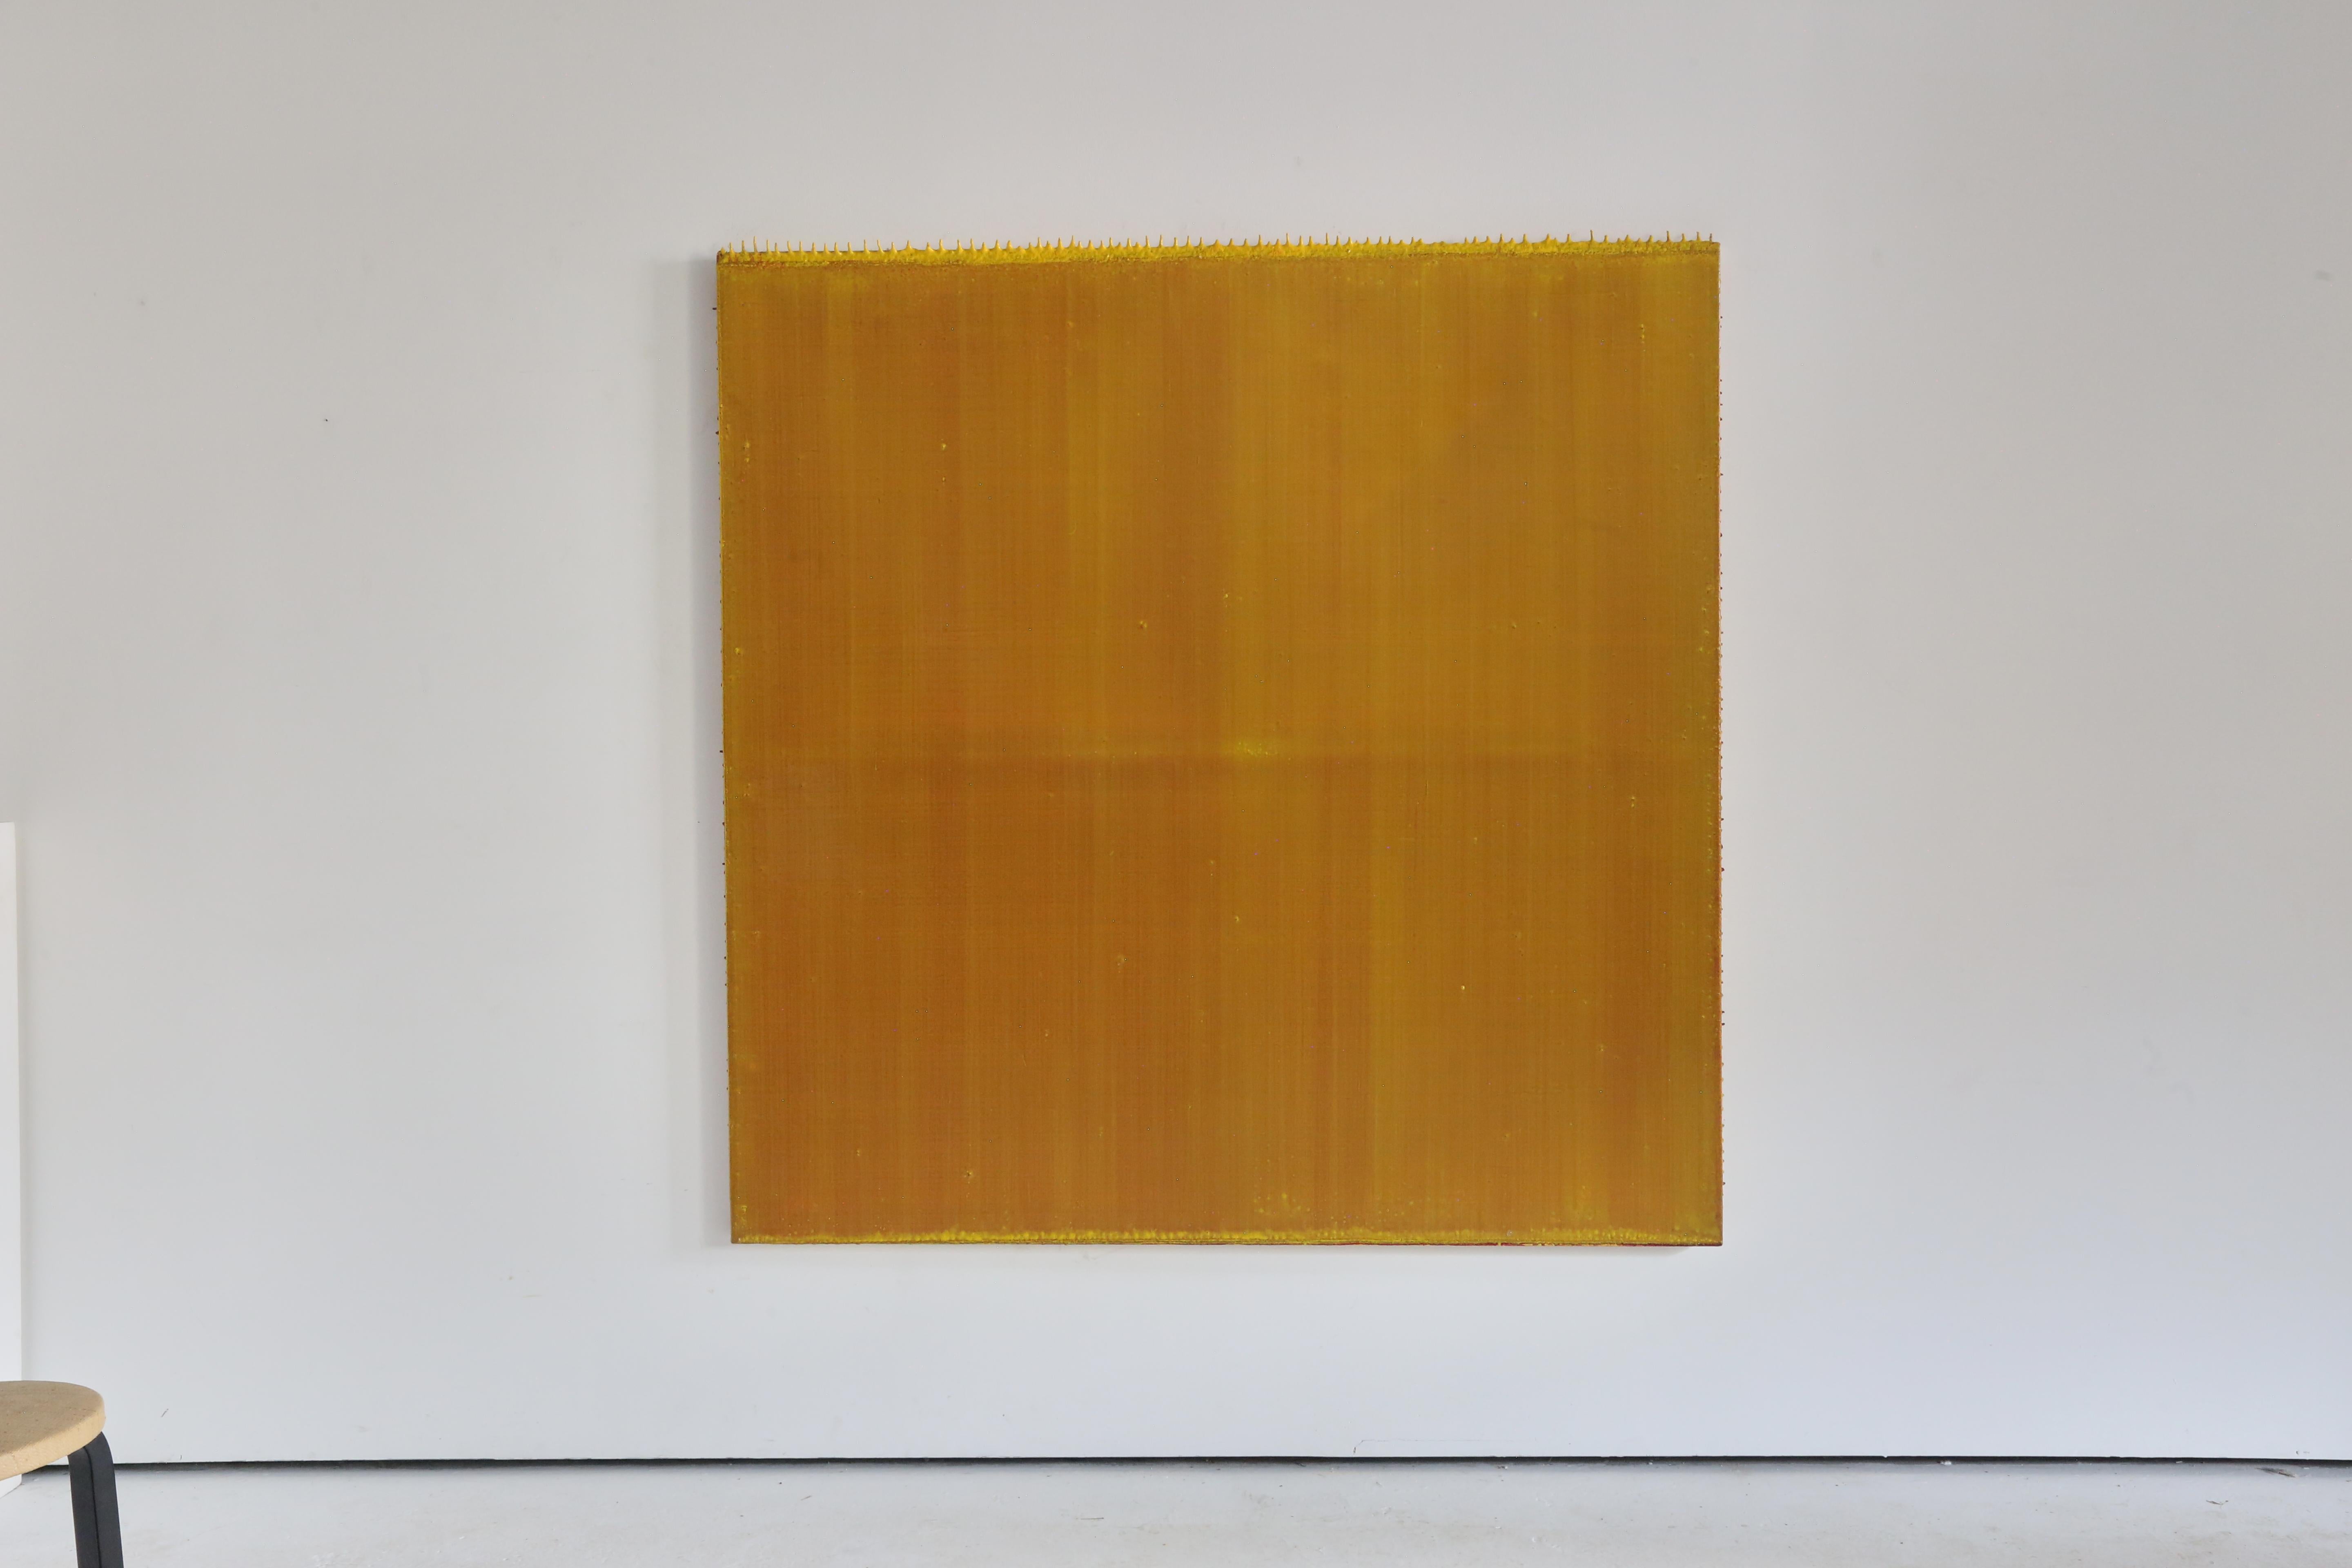 Late 20th Century British Minimalist Painting by Torie Begg 